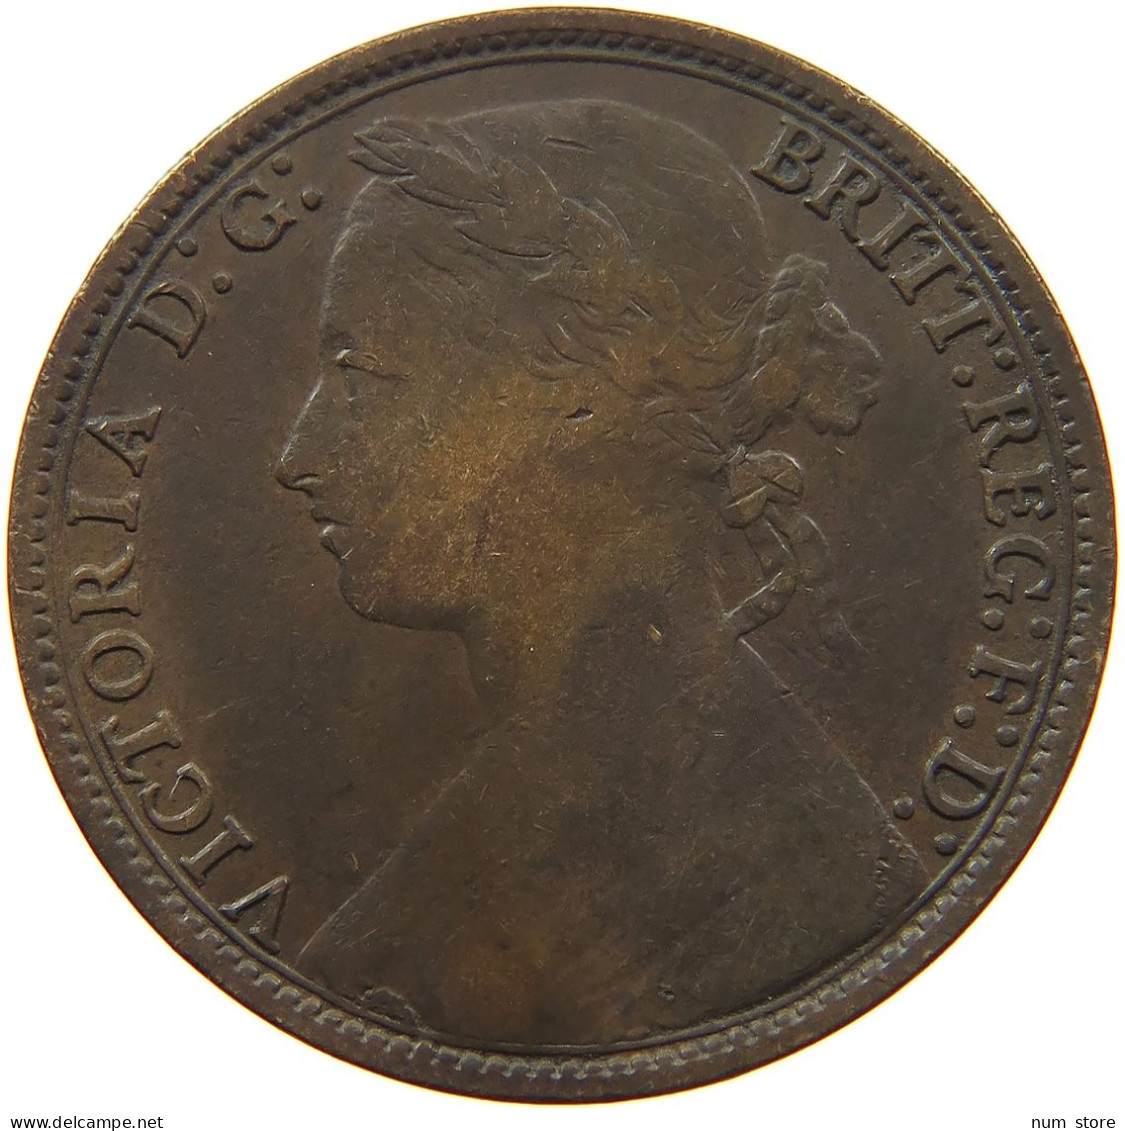 GREAT BRITAIN PENNY 1879 VICTORIA 1837-1901 #MA 101850 - D. 1 Penny